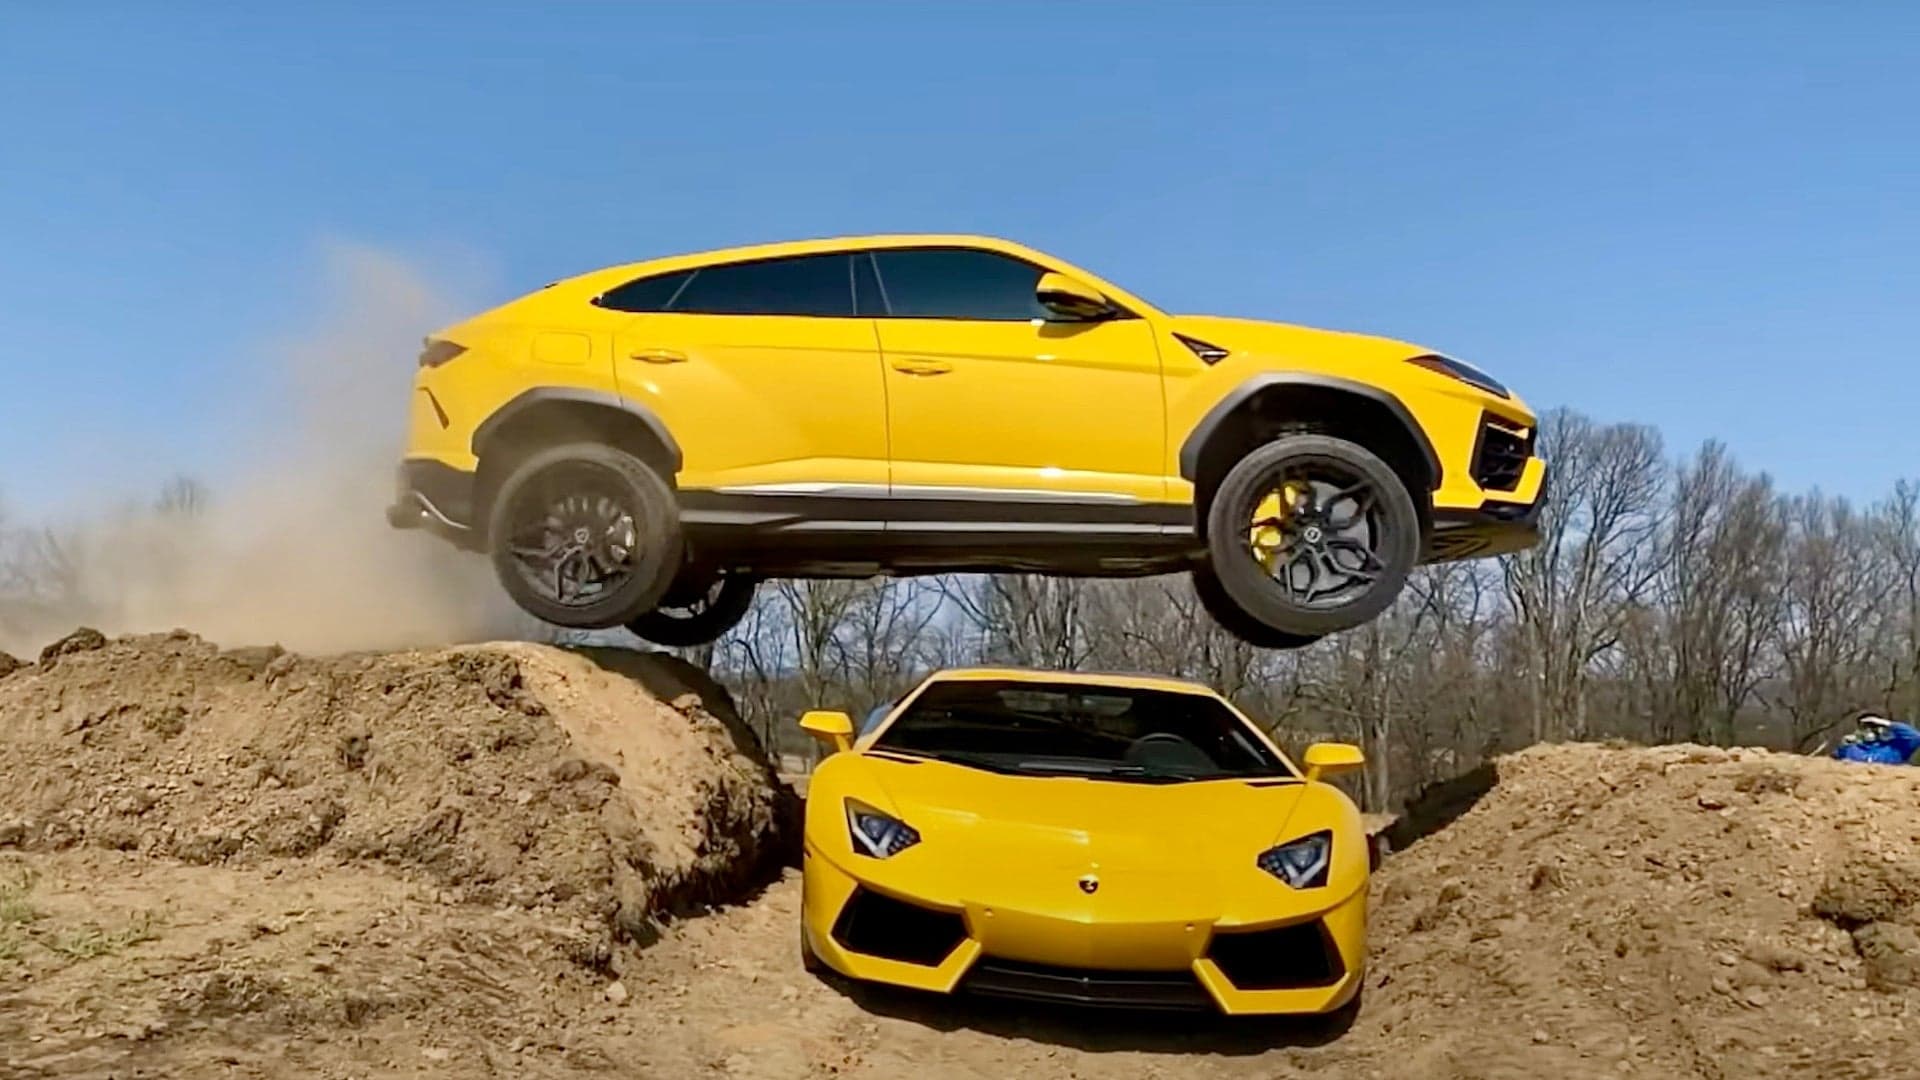 That TRX-Jumping YouTuber Sends a Lamborghini Urus Flying Over an Aventador